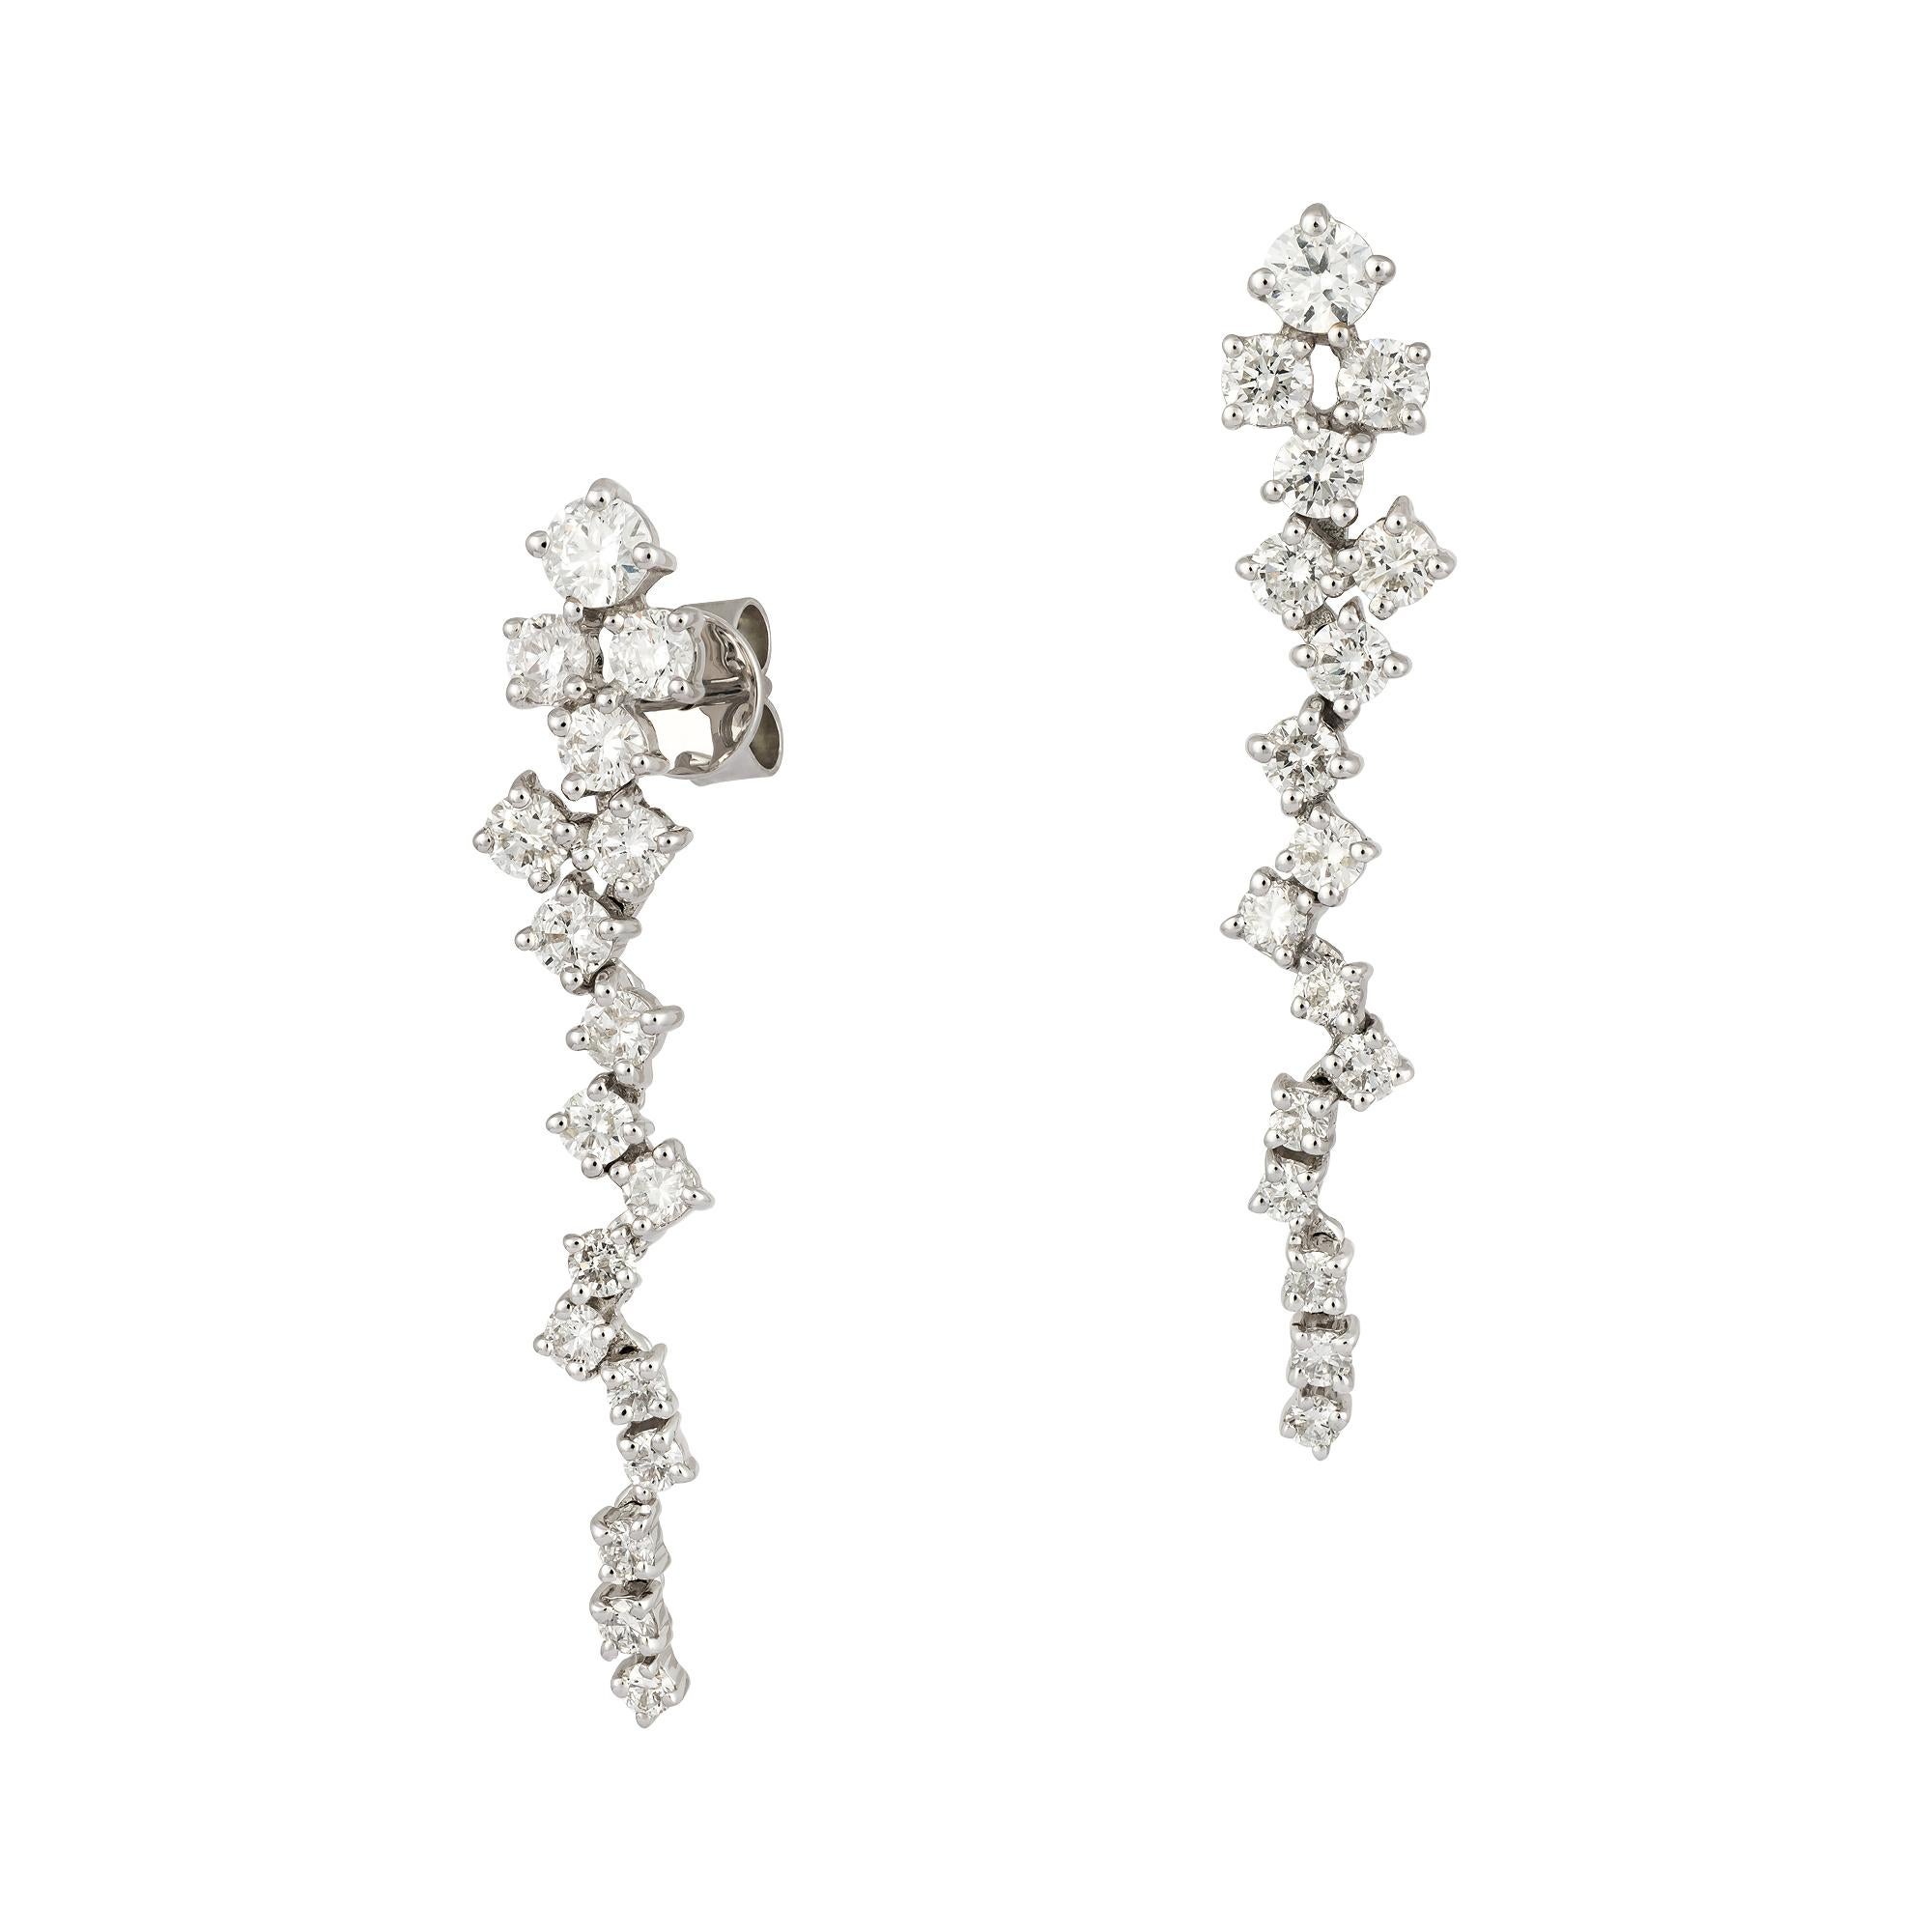 The Following Items we are offering is a Rare Important Spectacular and Brilliant 18KT Gold Large Gorgeous Fancy Cascading Diamond Drop Draping Earrings. Earrings consists of Rare Fine Magnificent Fancy Glittering Diamonds. T.C.W. over 2CTS!!! These